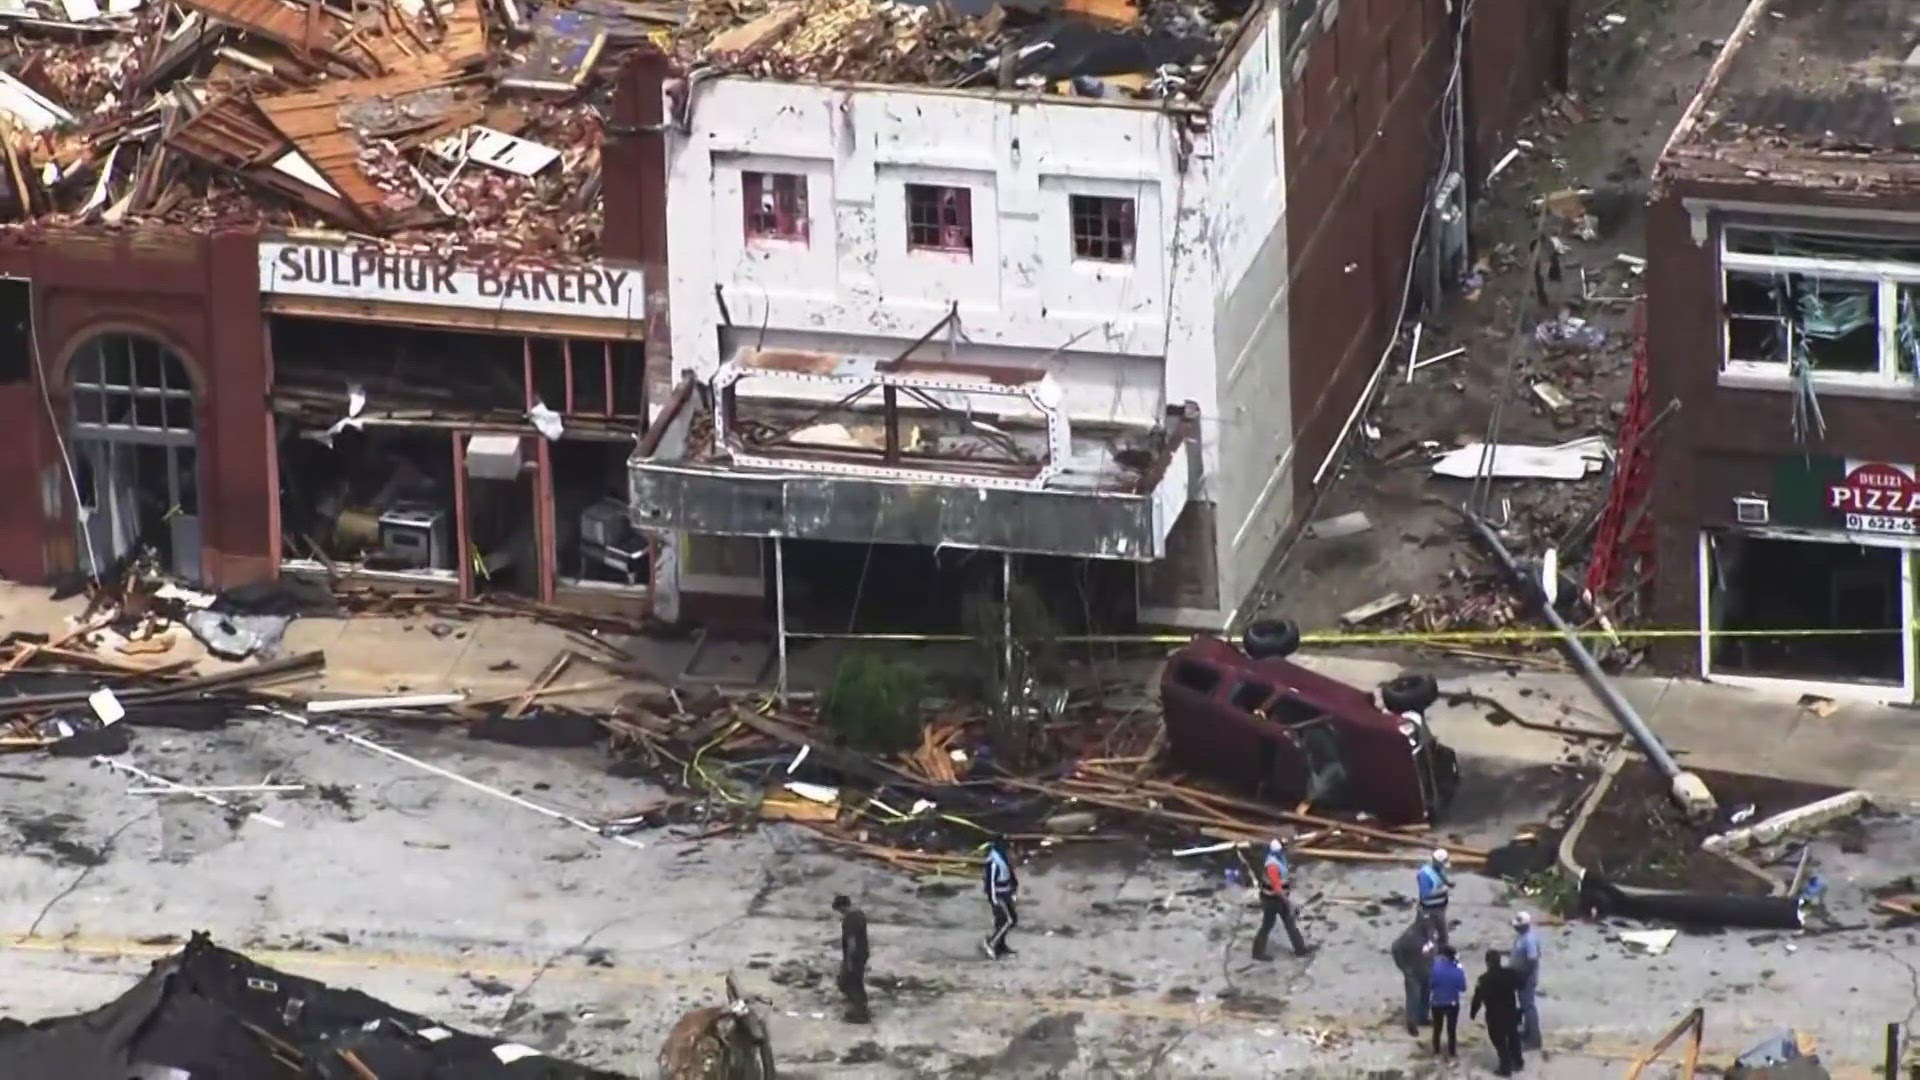 The tornado that caused extensive damage in Sulphur, Oklahoma was at least an EF-3, the NWS said. More than 100 tornadoes roared across the Plains States.